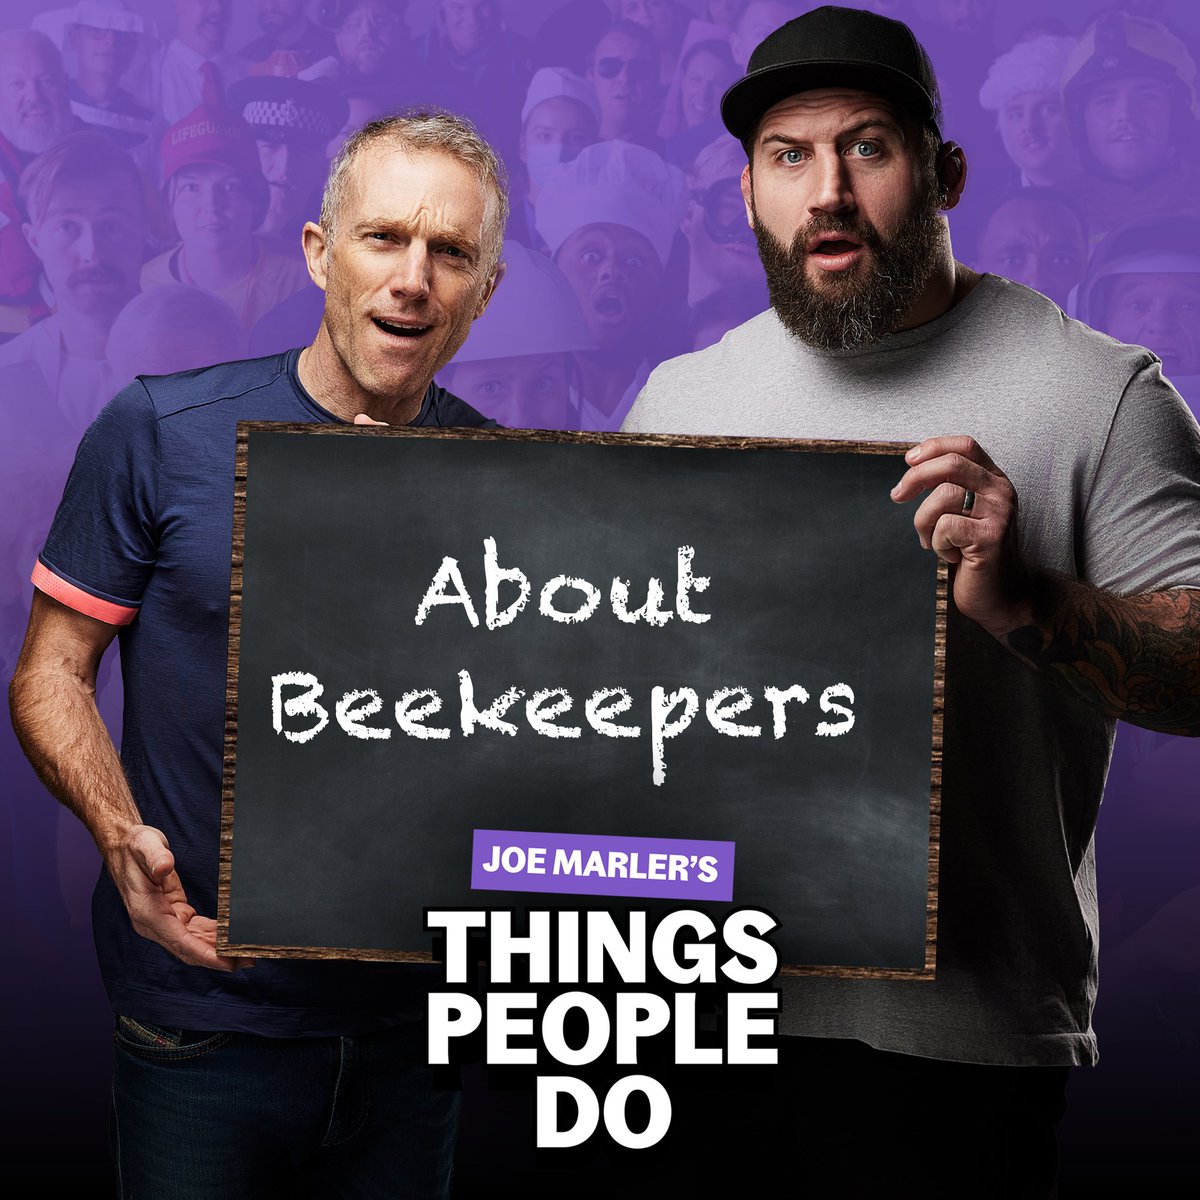 It's 2024 and we're buzzing to be back! 🐝 Emma the Beekeeper is today's guest who tells us all about giant bee nightclubs, getting stung (a lot), and why bees explode after sex. Yes really. Just search 'Things People Do' in your podcast app x